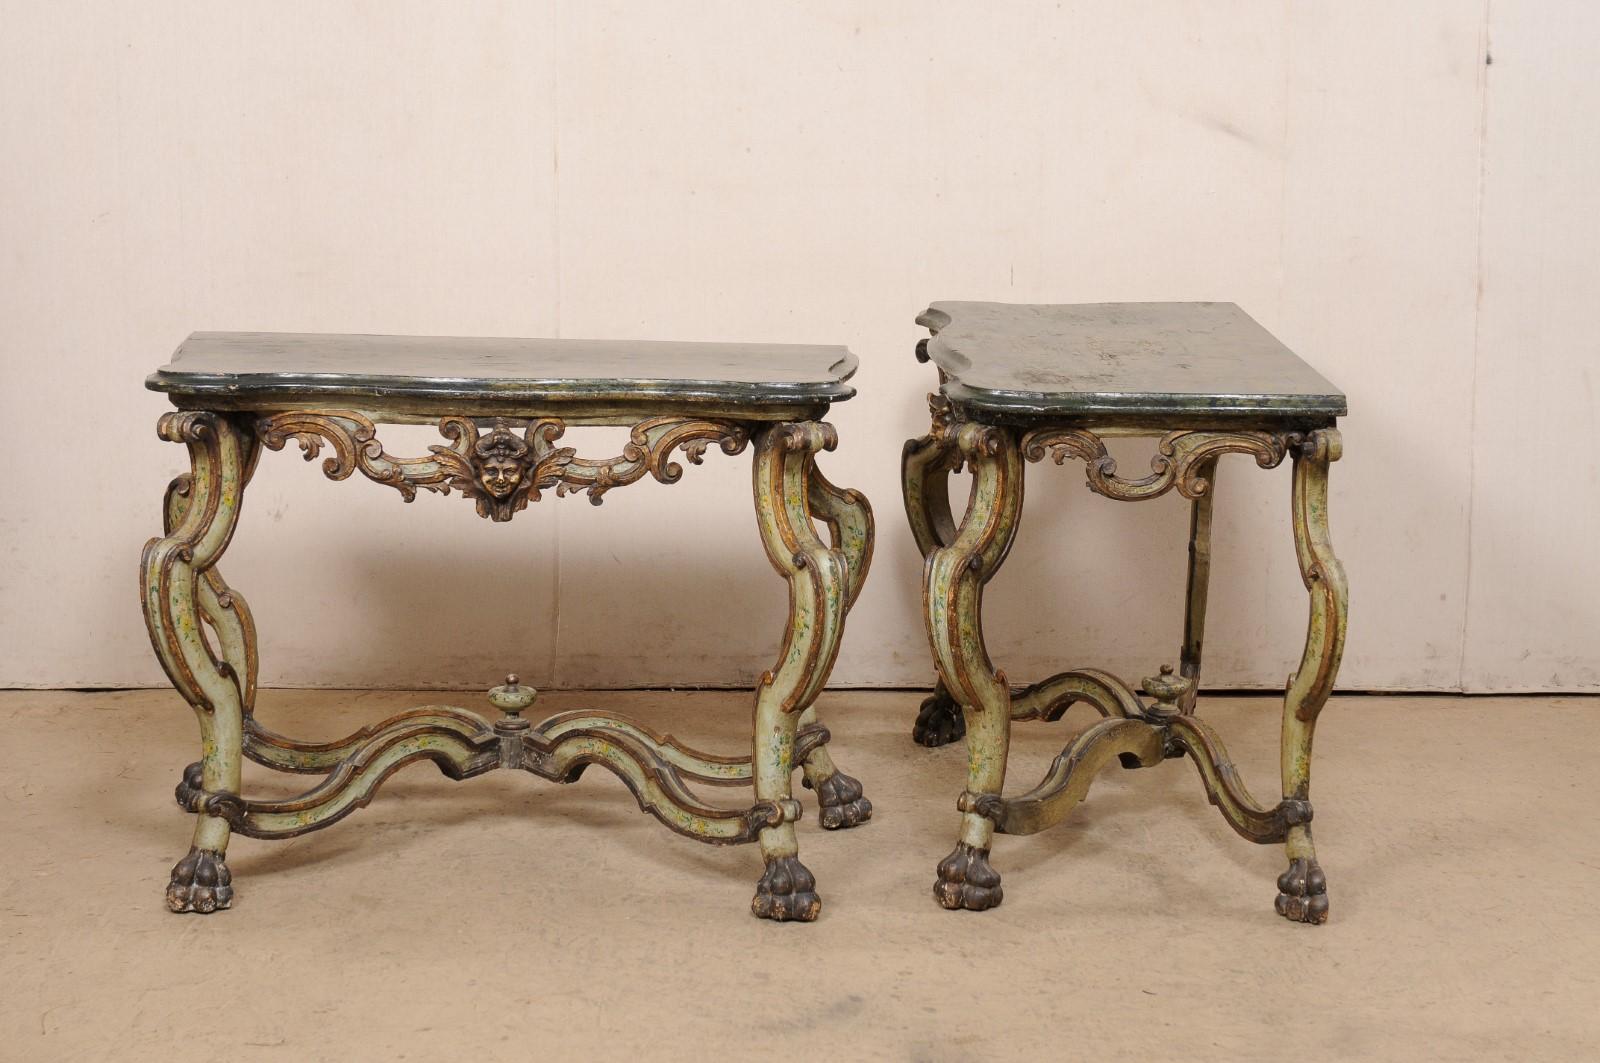 Exquisite Pair of 18th C. Italian Venetian Carved & Painted Wood Console Tables For Sale 6